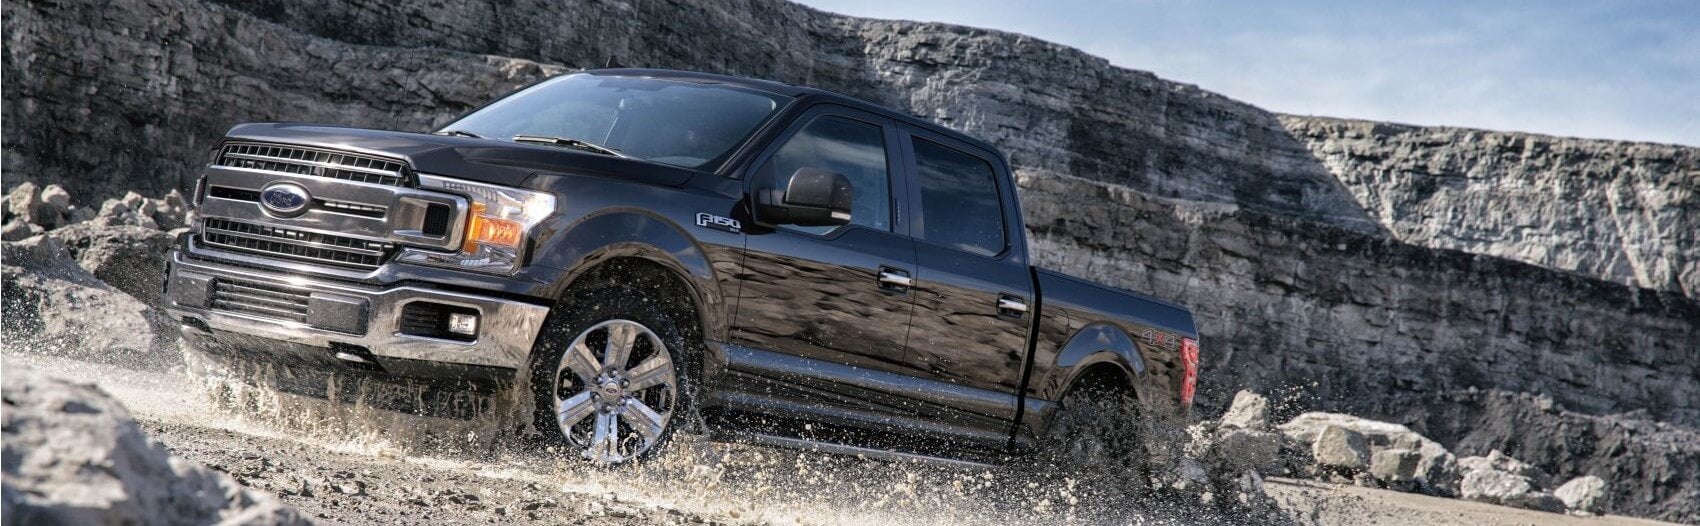 Ford F150 Snipped